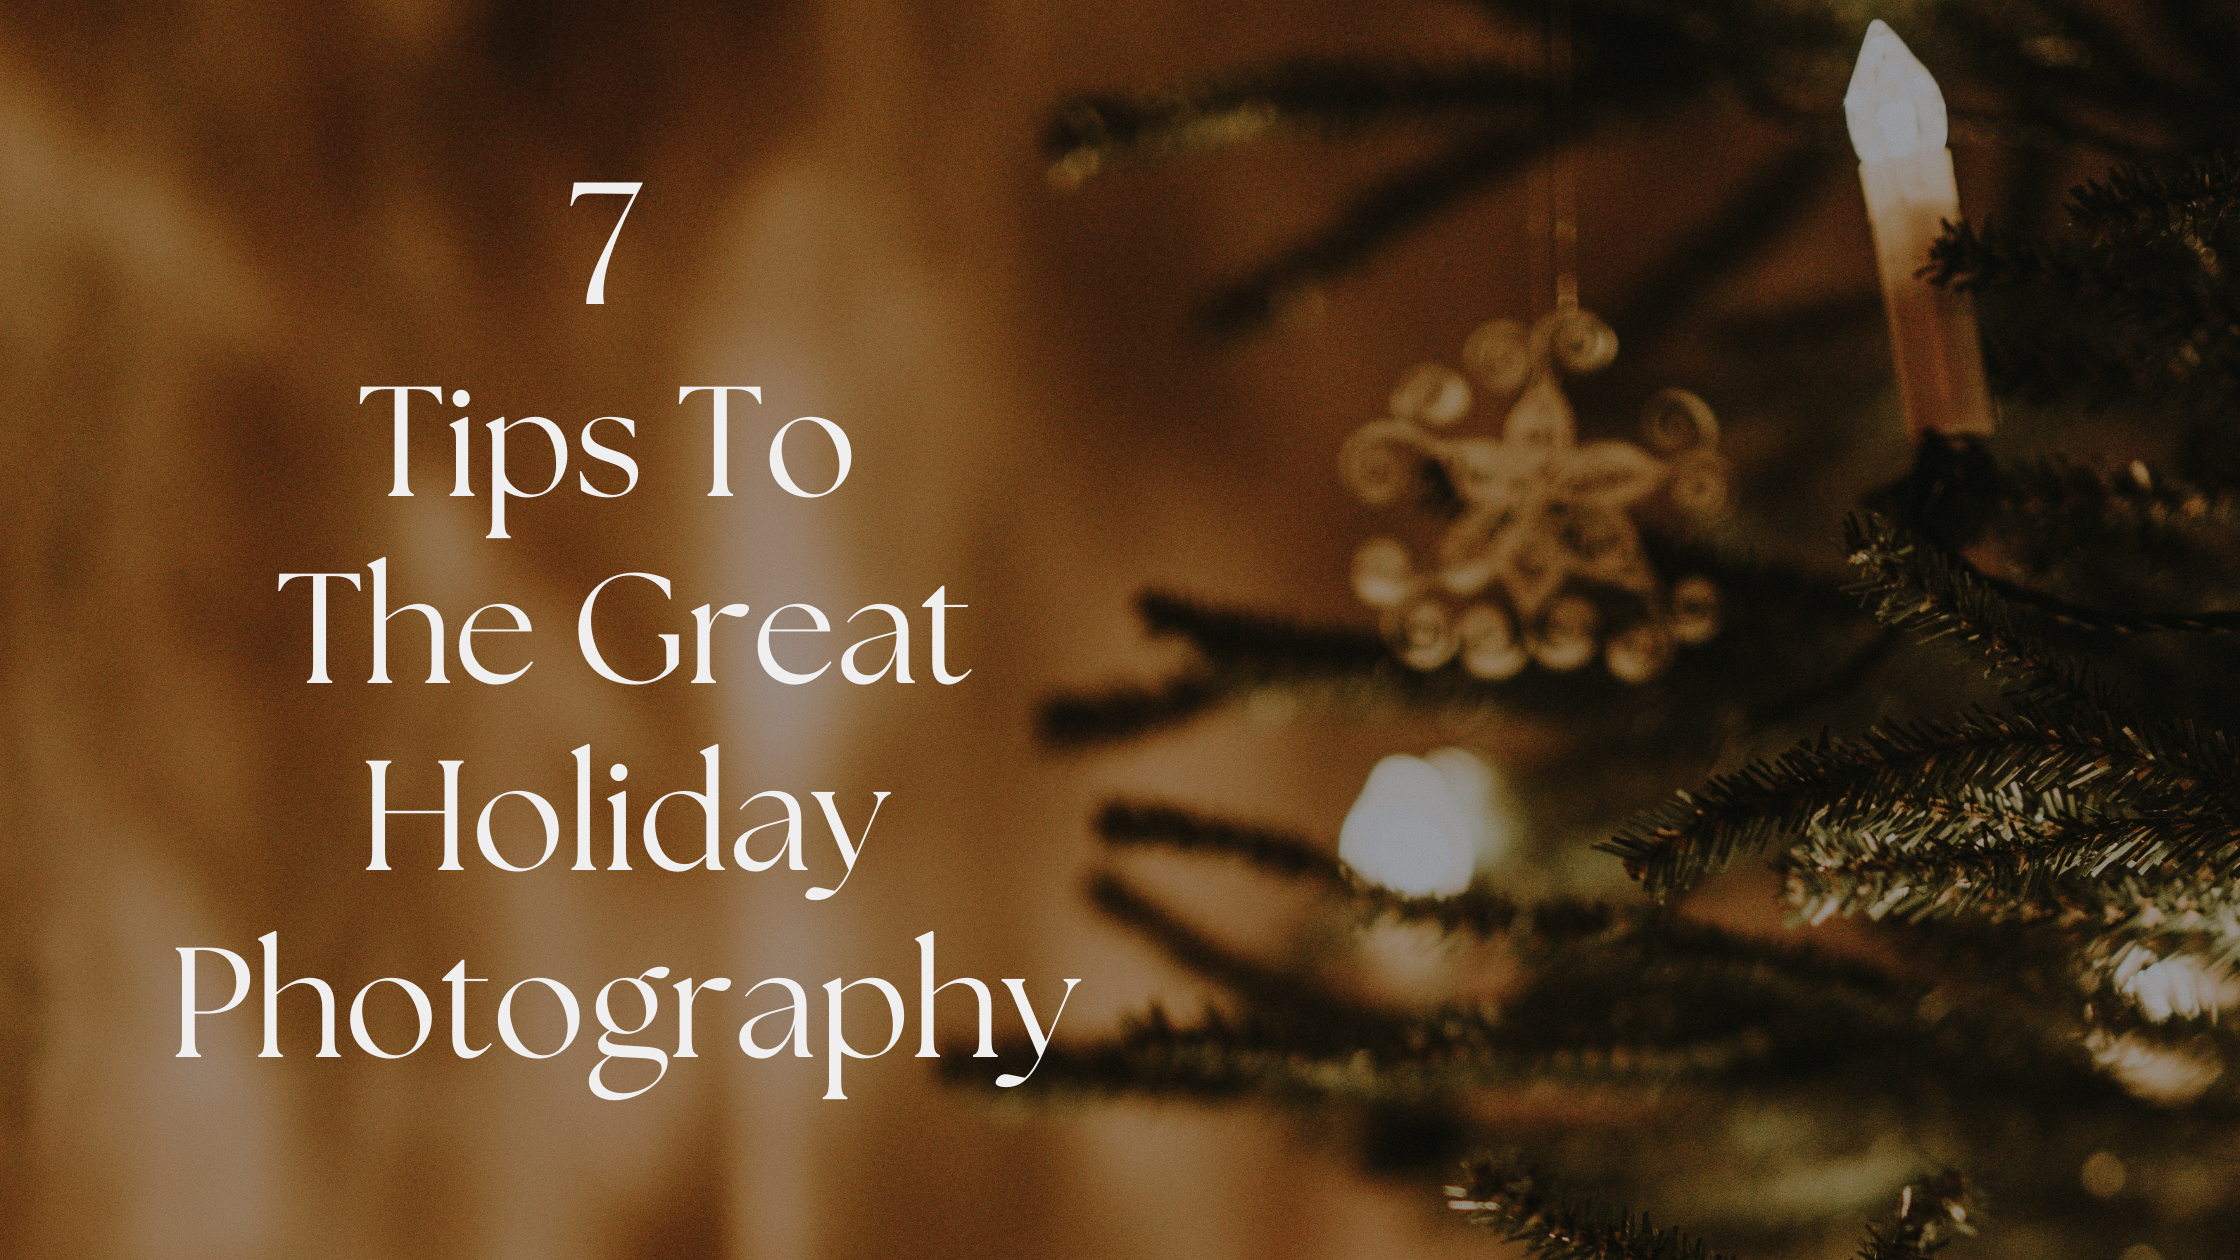 7 Tips To The Great Holiday Photography